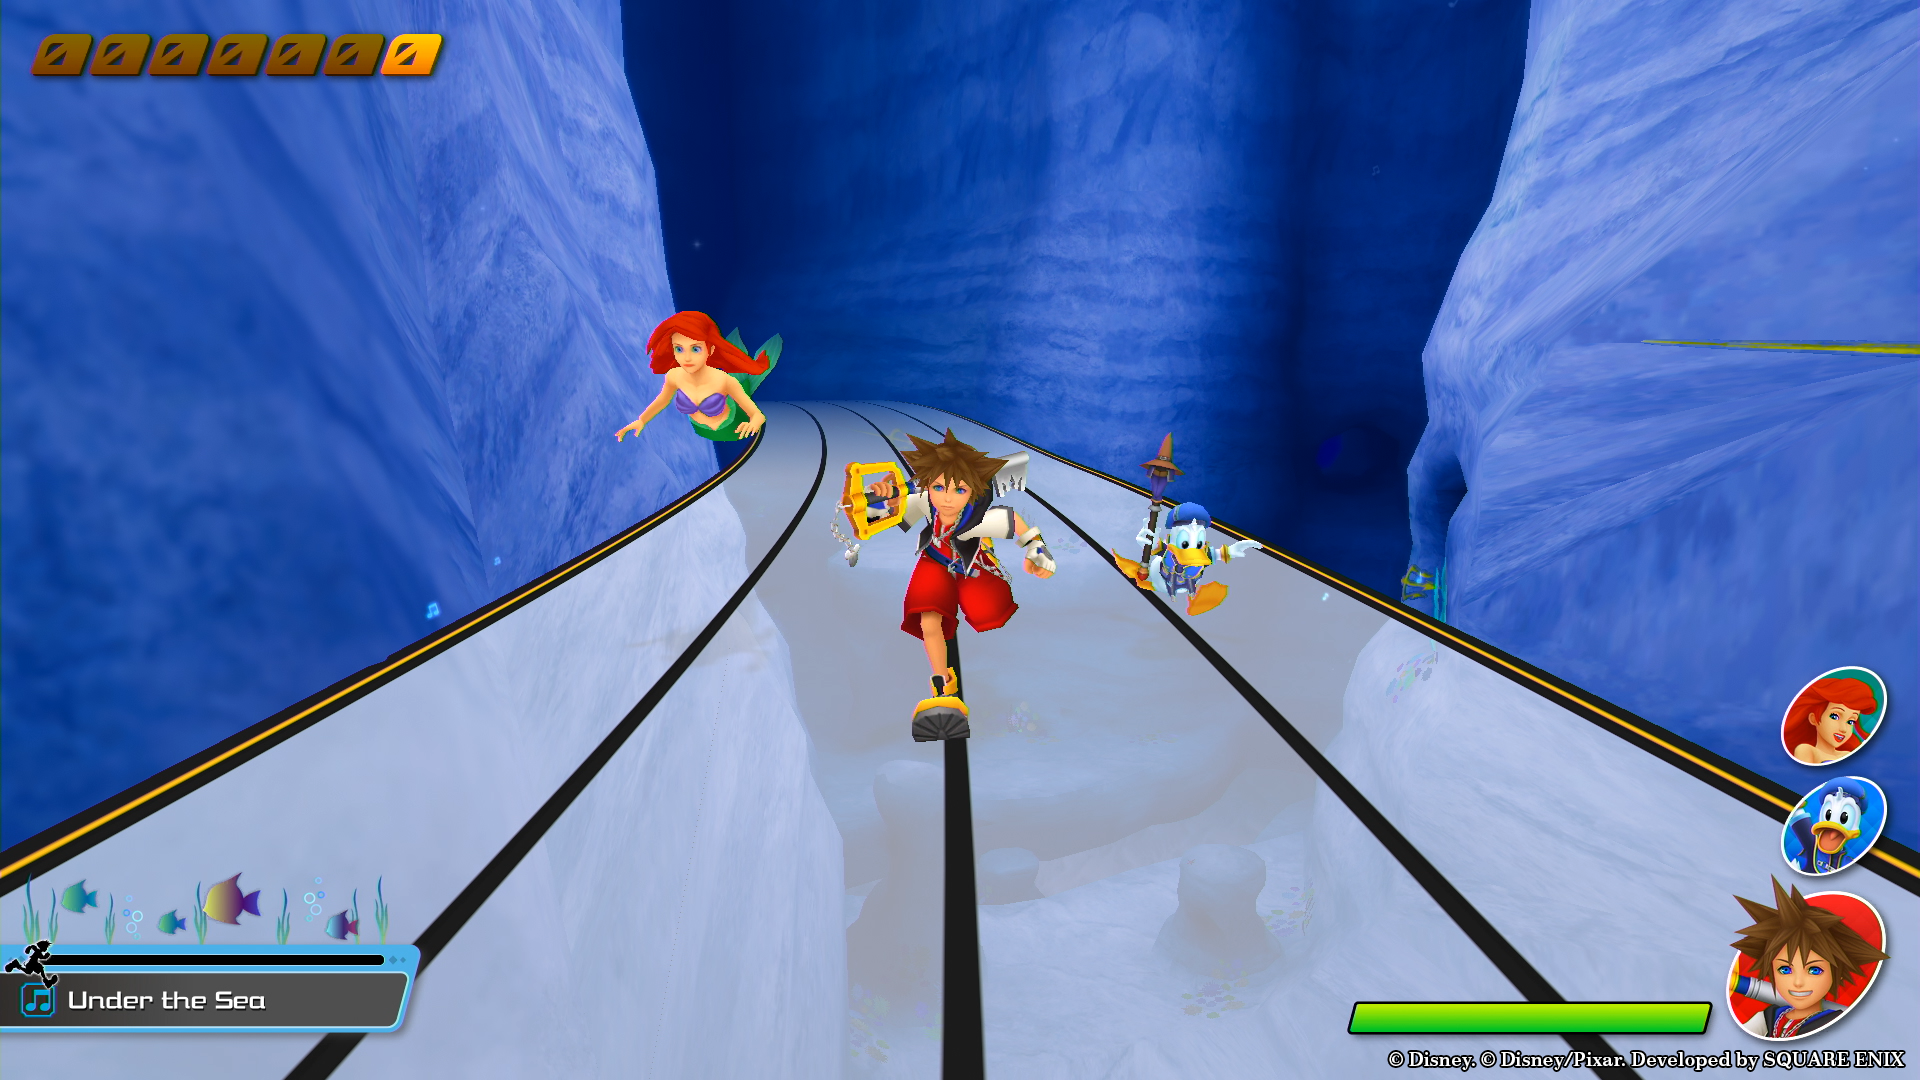 New Kingdom Hearts Melody of Memory information details